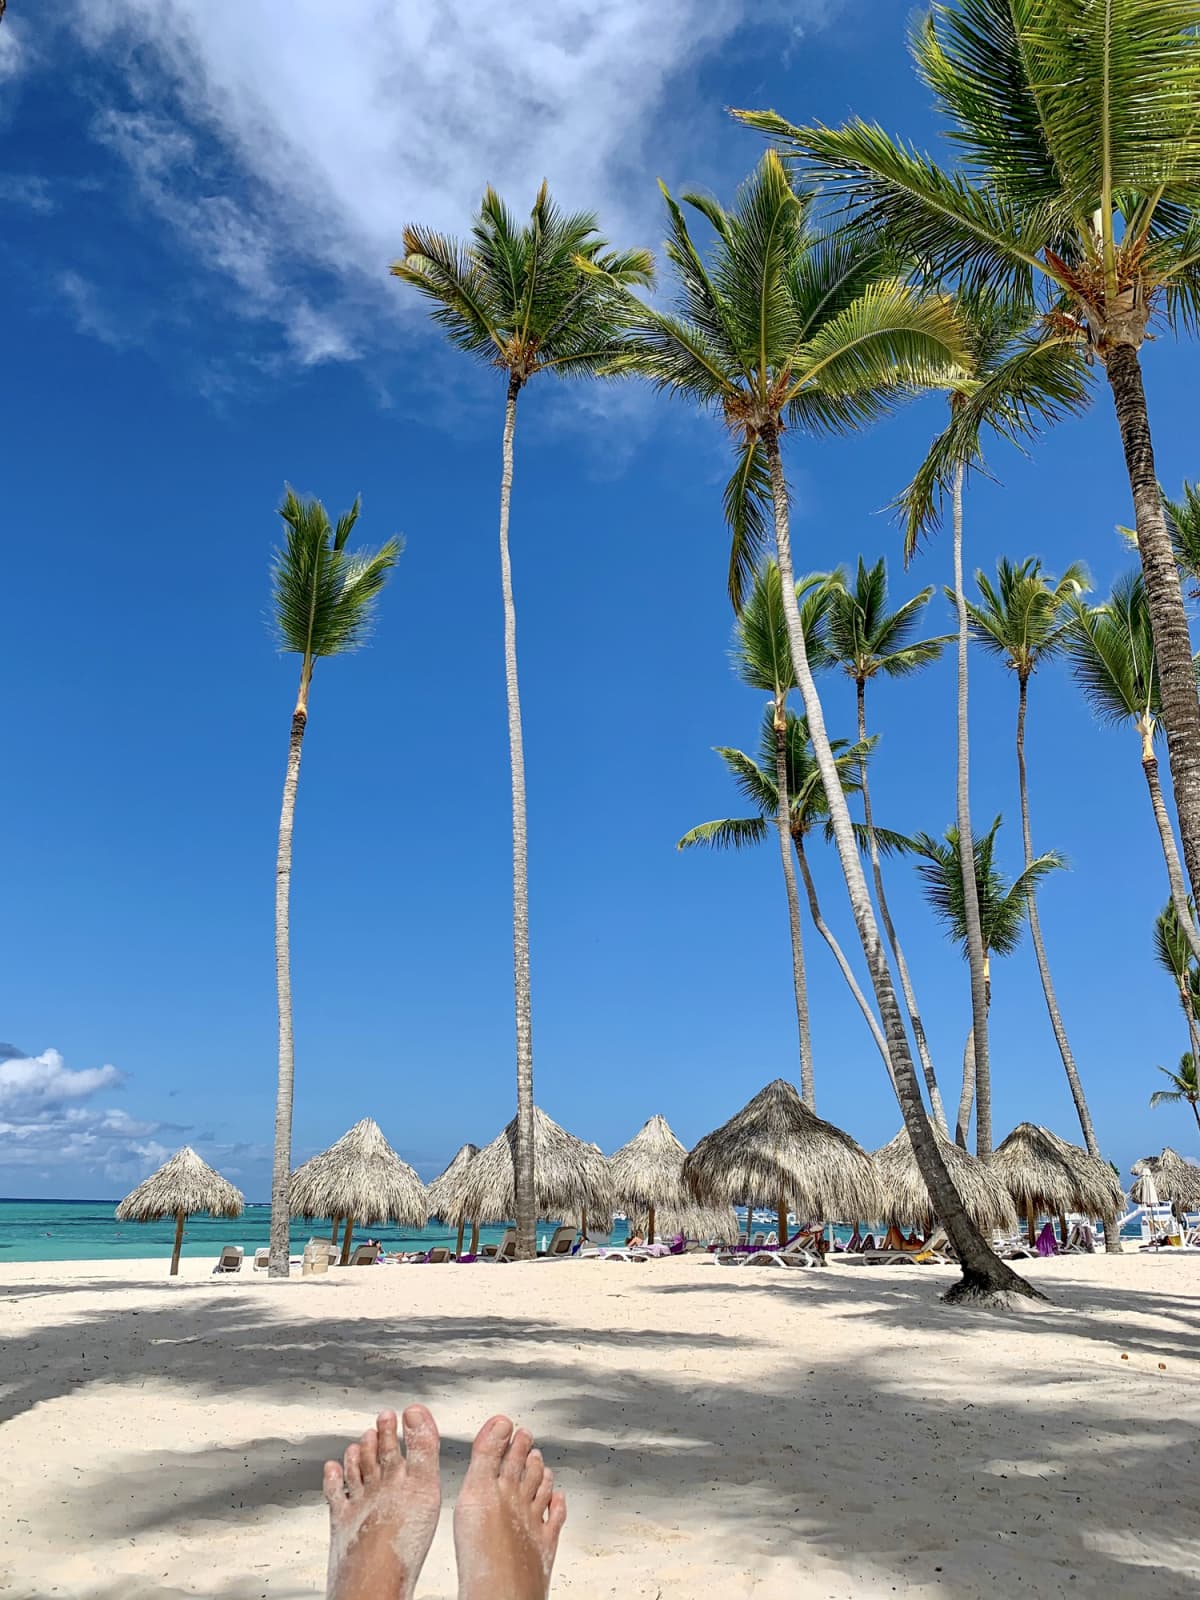 a white sandy beach with the ocean, palm trees, and tiki umbrellas in the distance from the point of view of a person laying on the beach